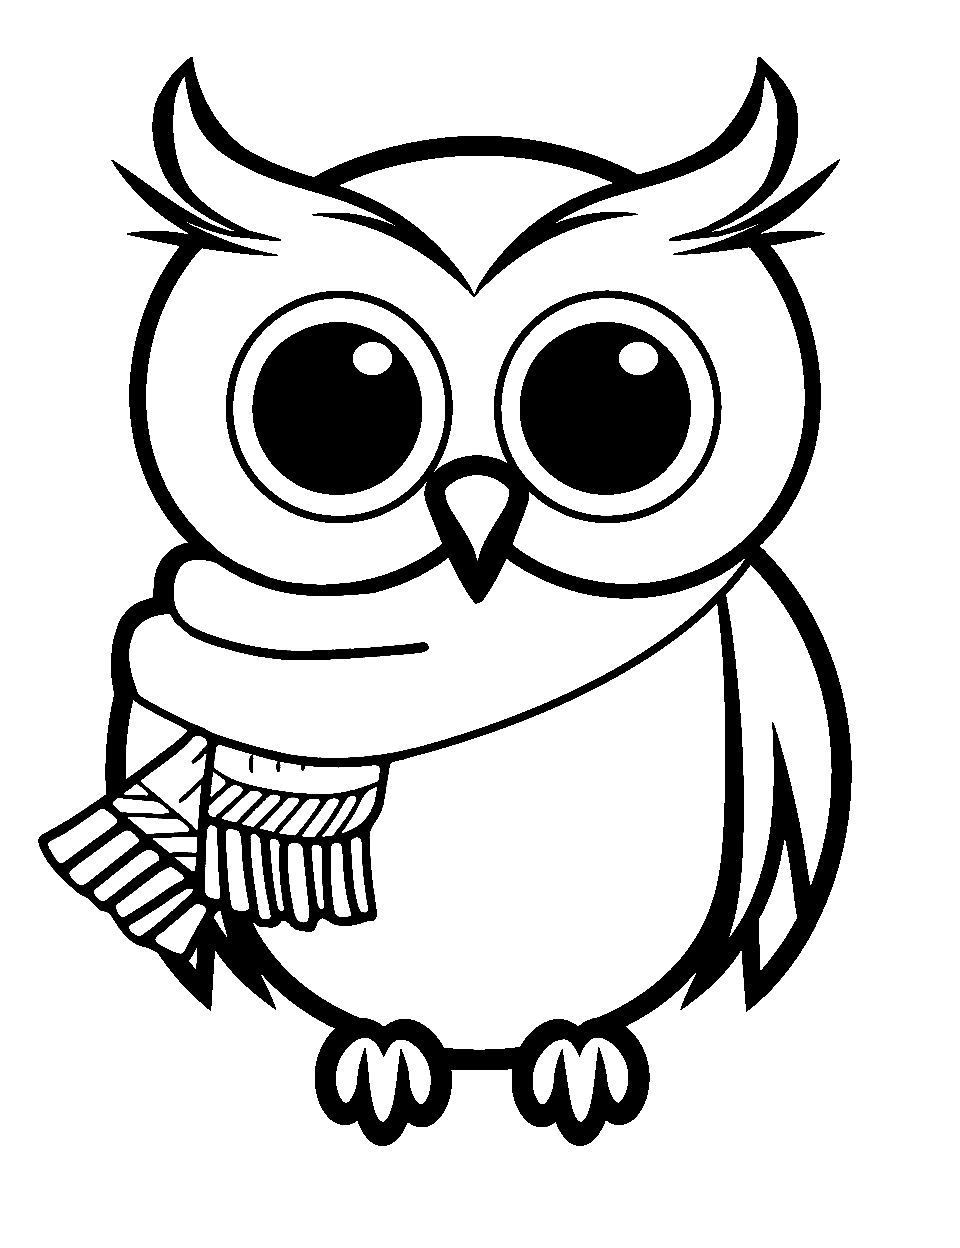 Winter Owl Coloring Page - An owl bundled up in a cozy scarf for winter.